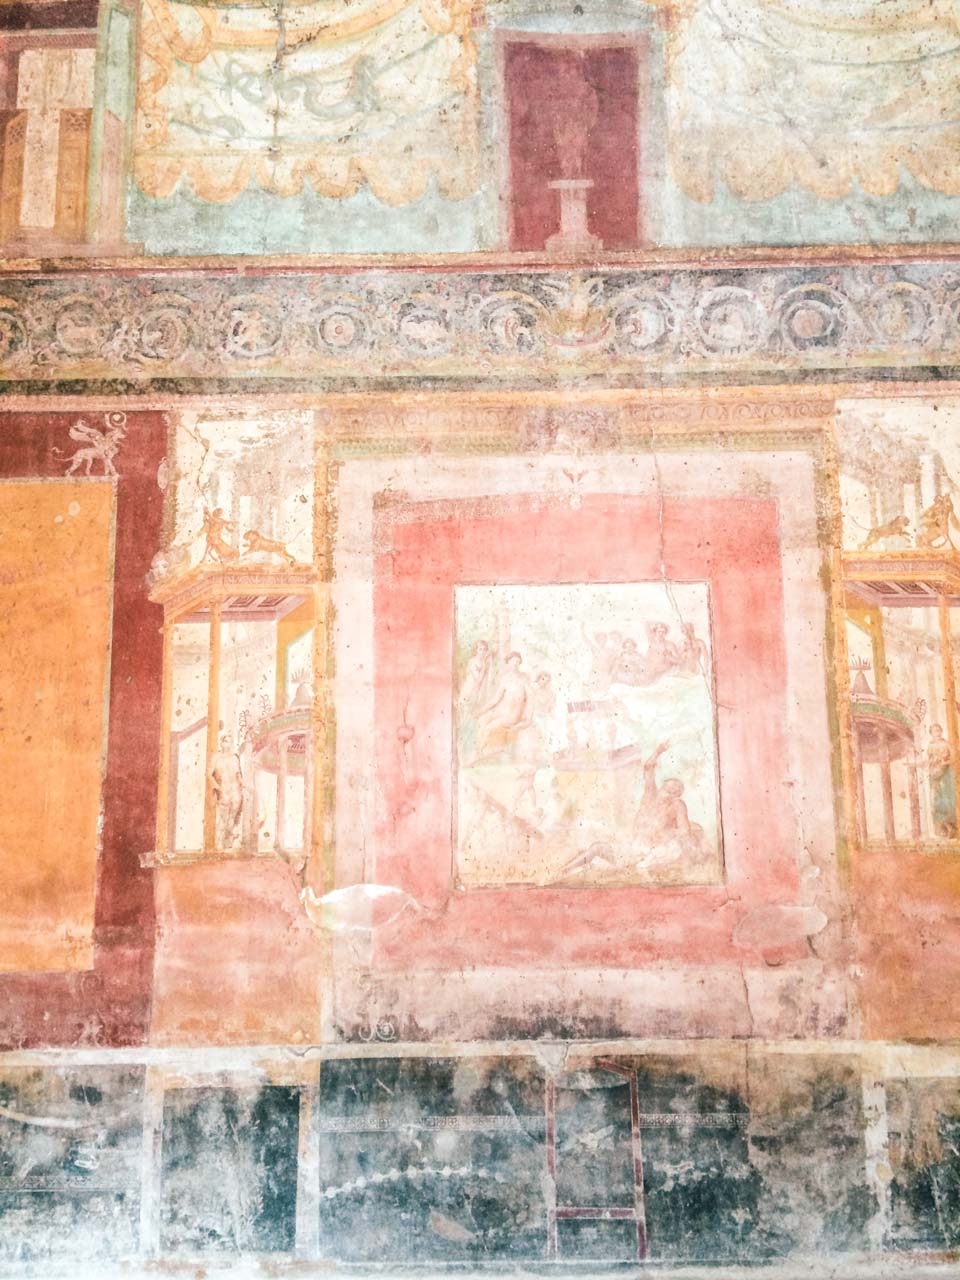 Old colourful paintings on the walls of a building inside Pompeii